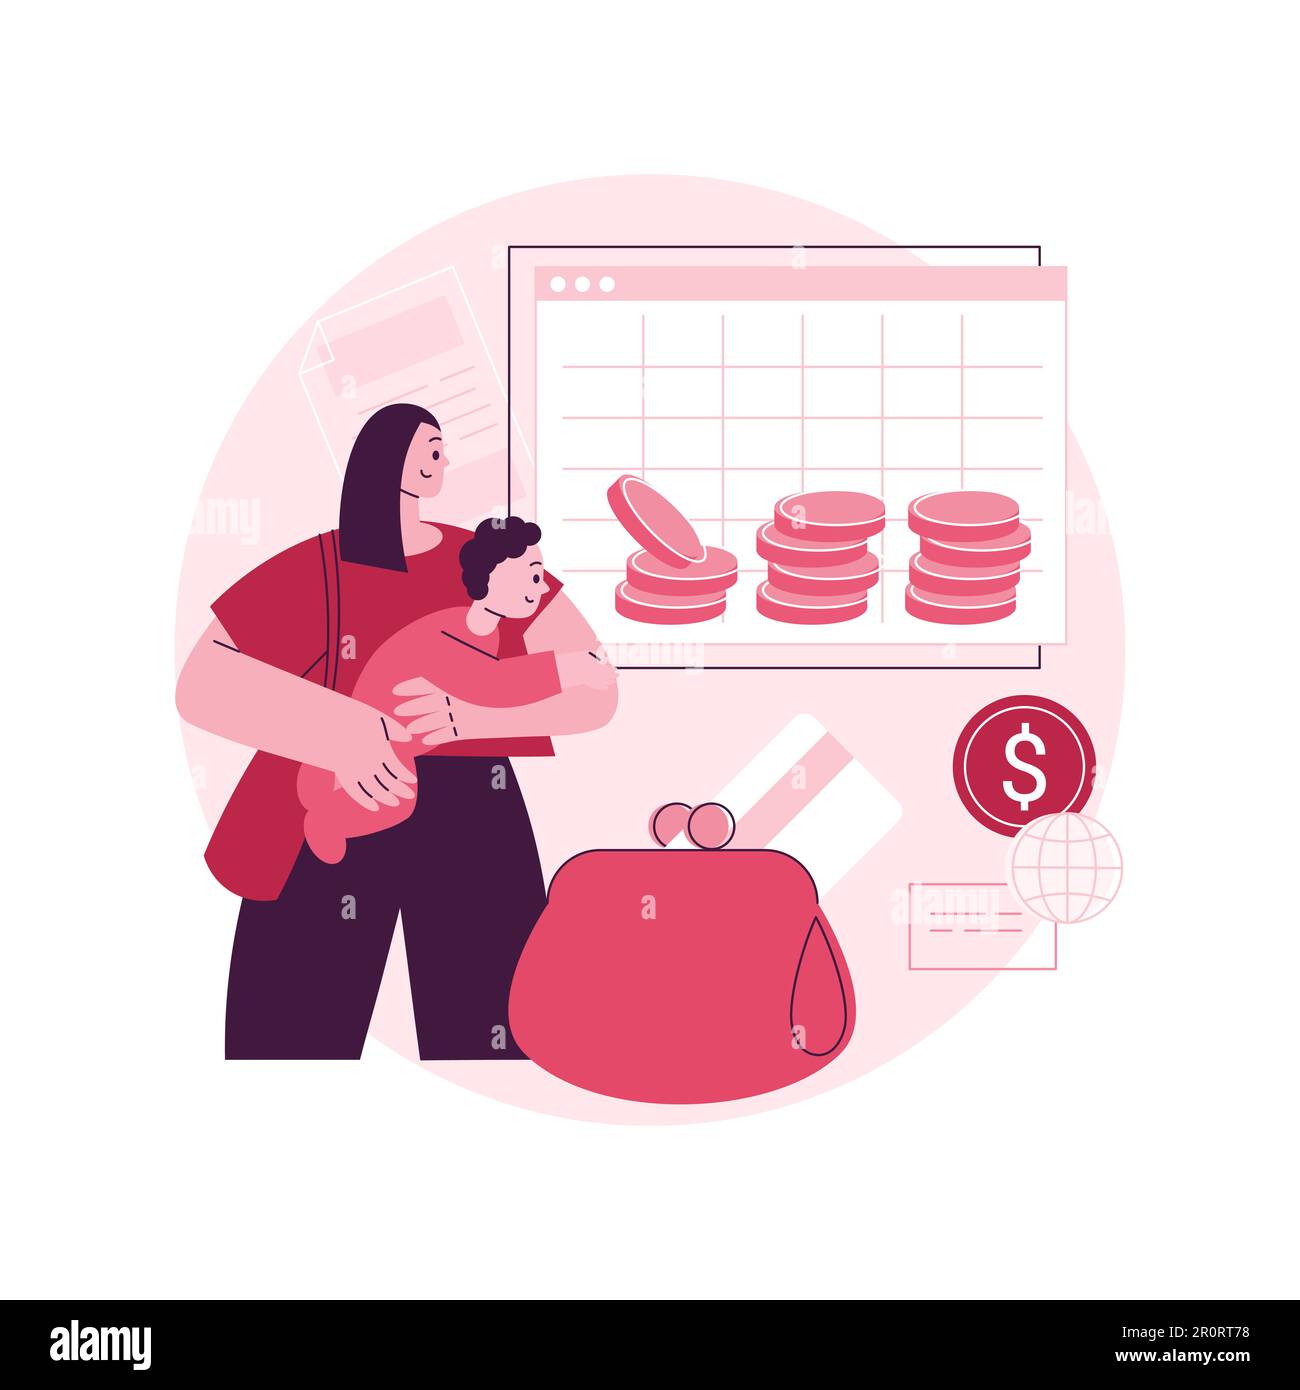 Child care expense deduction abstract concept vector illustration. Dependent care costs, benefit plan, tax return, taxable income, family budget, bank transfer, paycheck abstract metaphor. Stock Vector